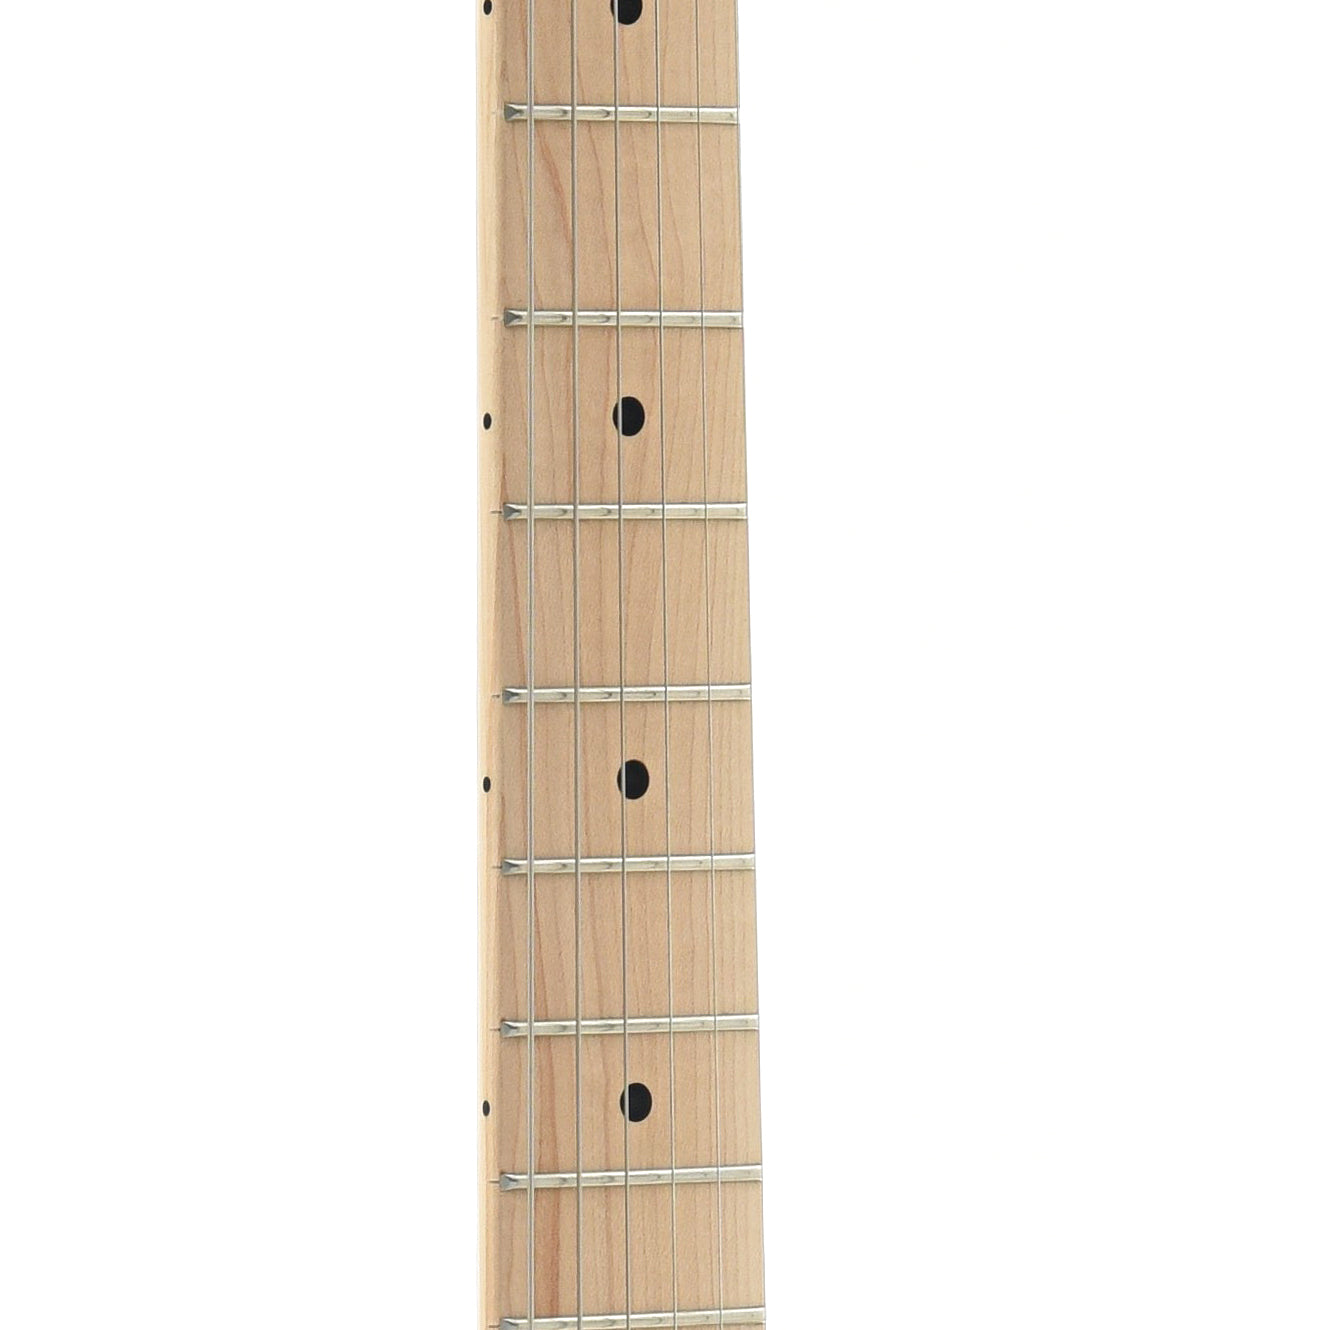 Fretboard of Squier Affinity Telecaster